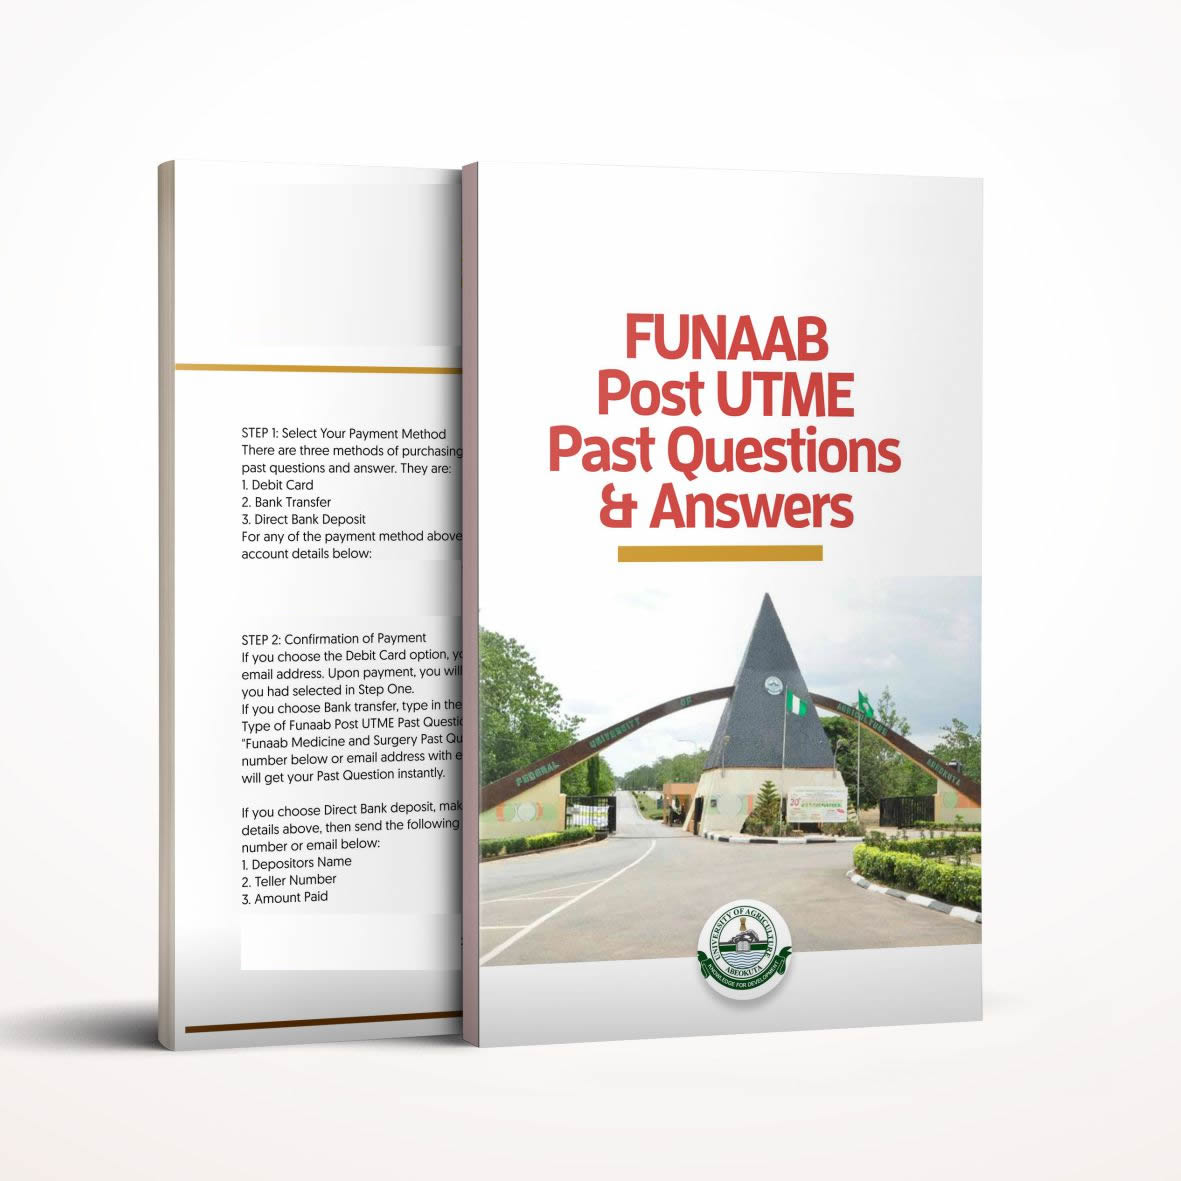 FUNAAB Post UTME past questions and answers